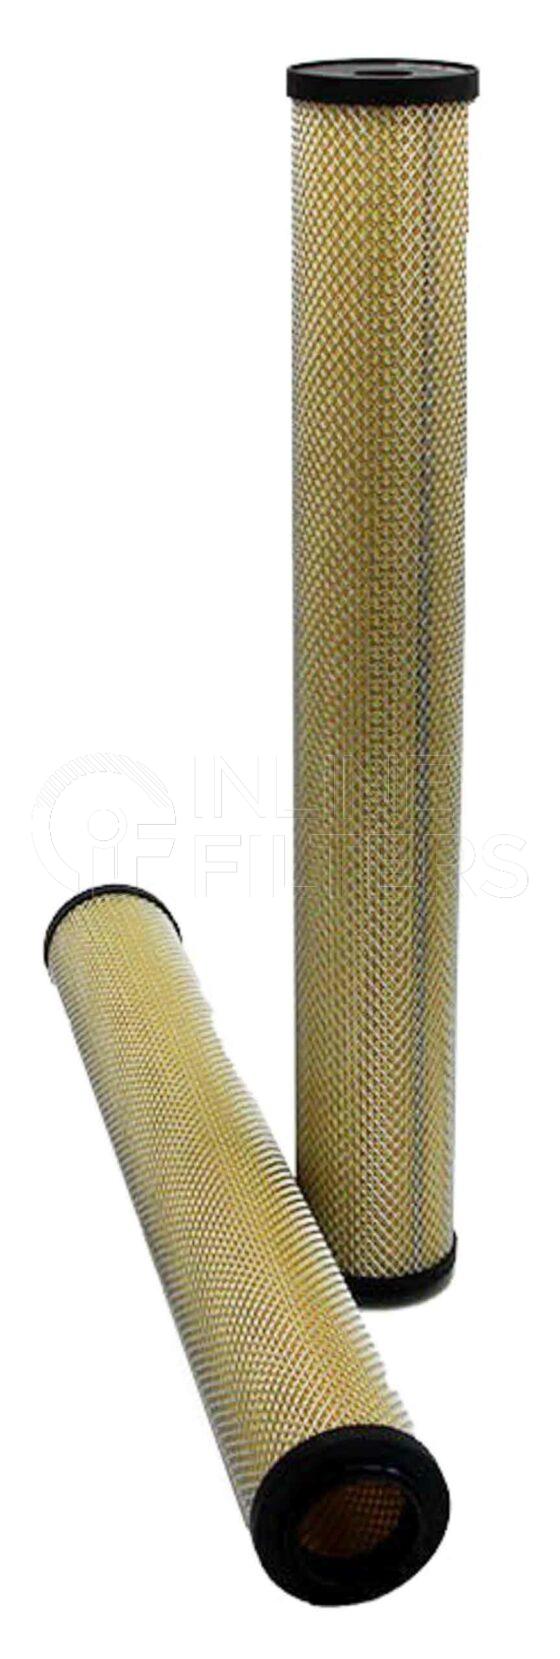 Inline FA13809. Air Filter Product – Compressed Air – Cartridge Product Air filter product